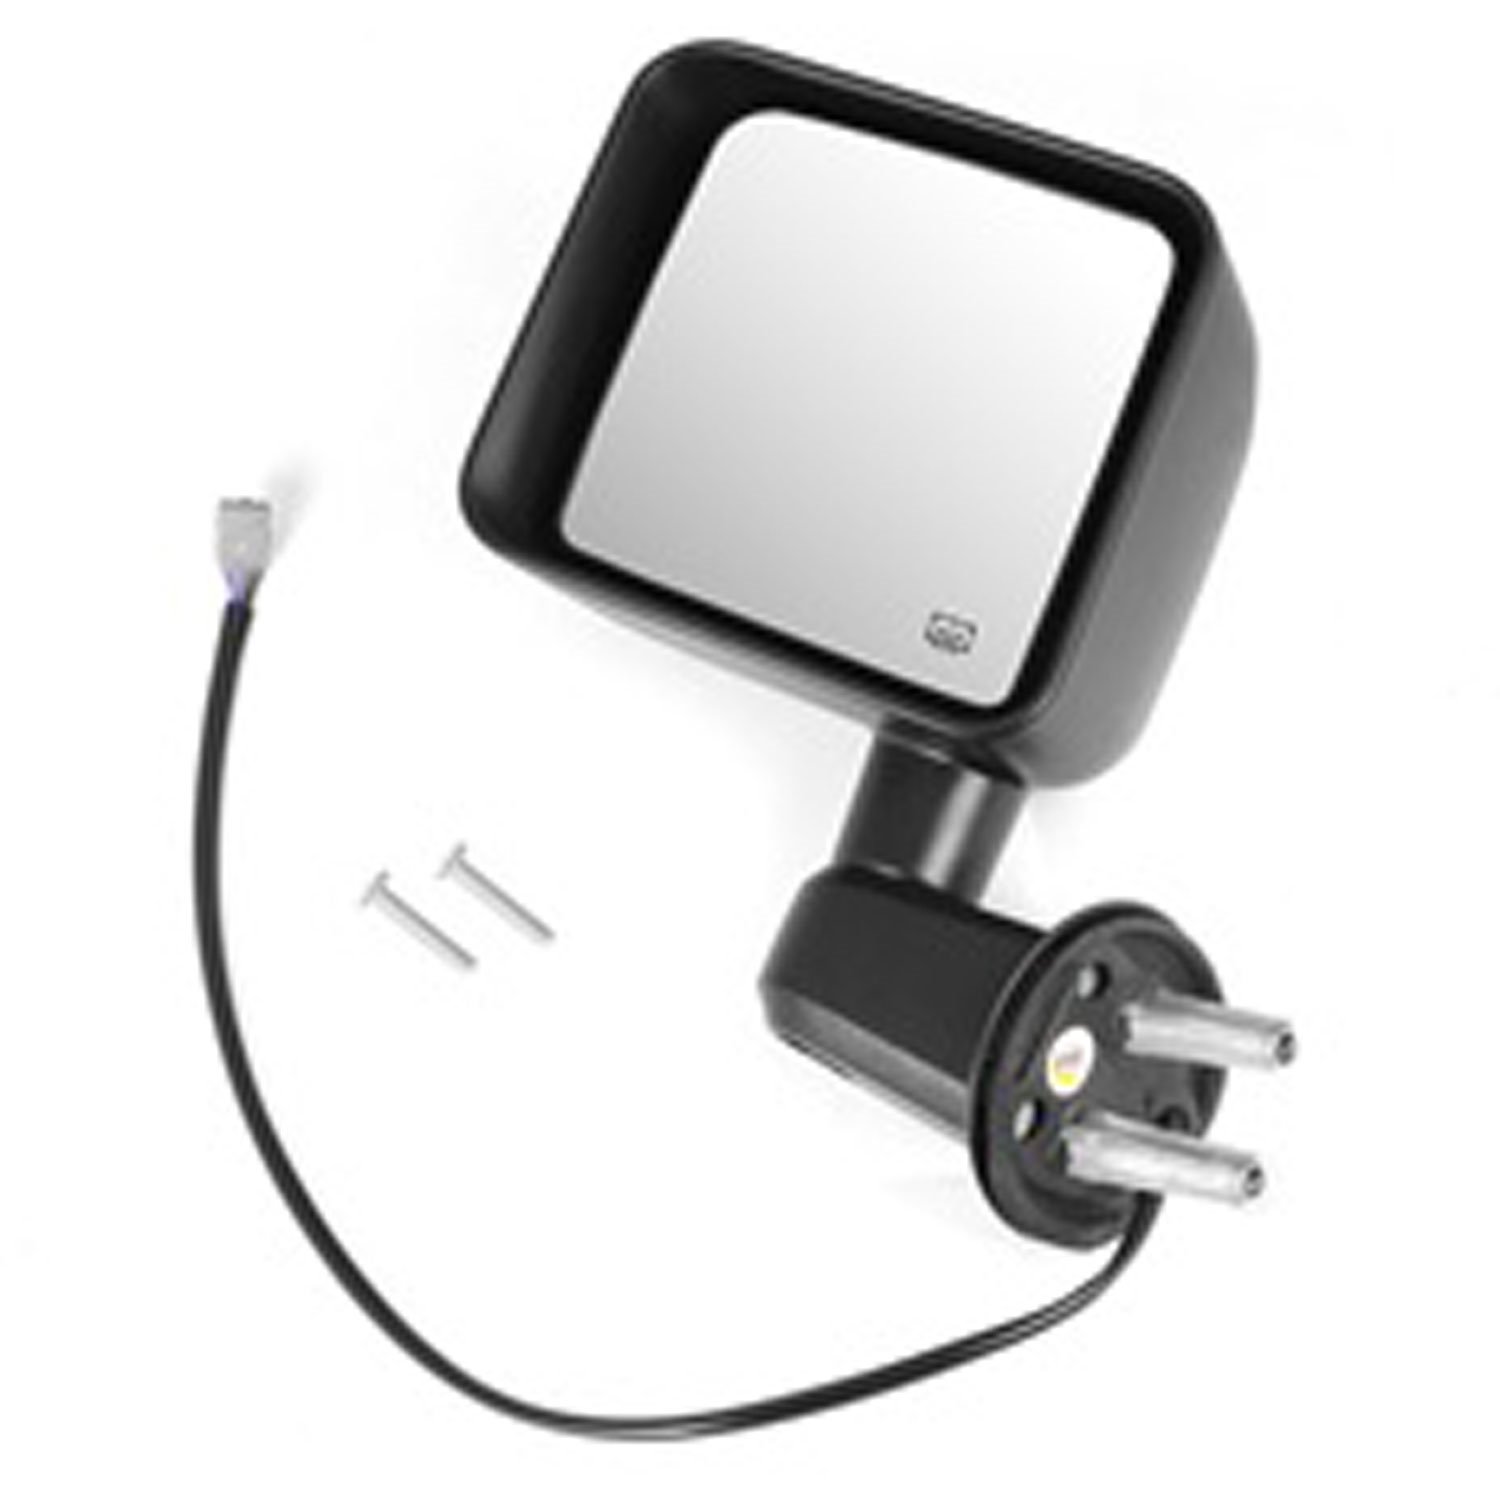 This black heated power mirror from Omix-ADA fits the left hand side on 11-13 Jeep Wrangler.